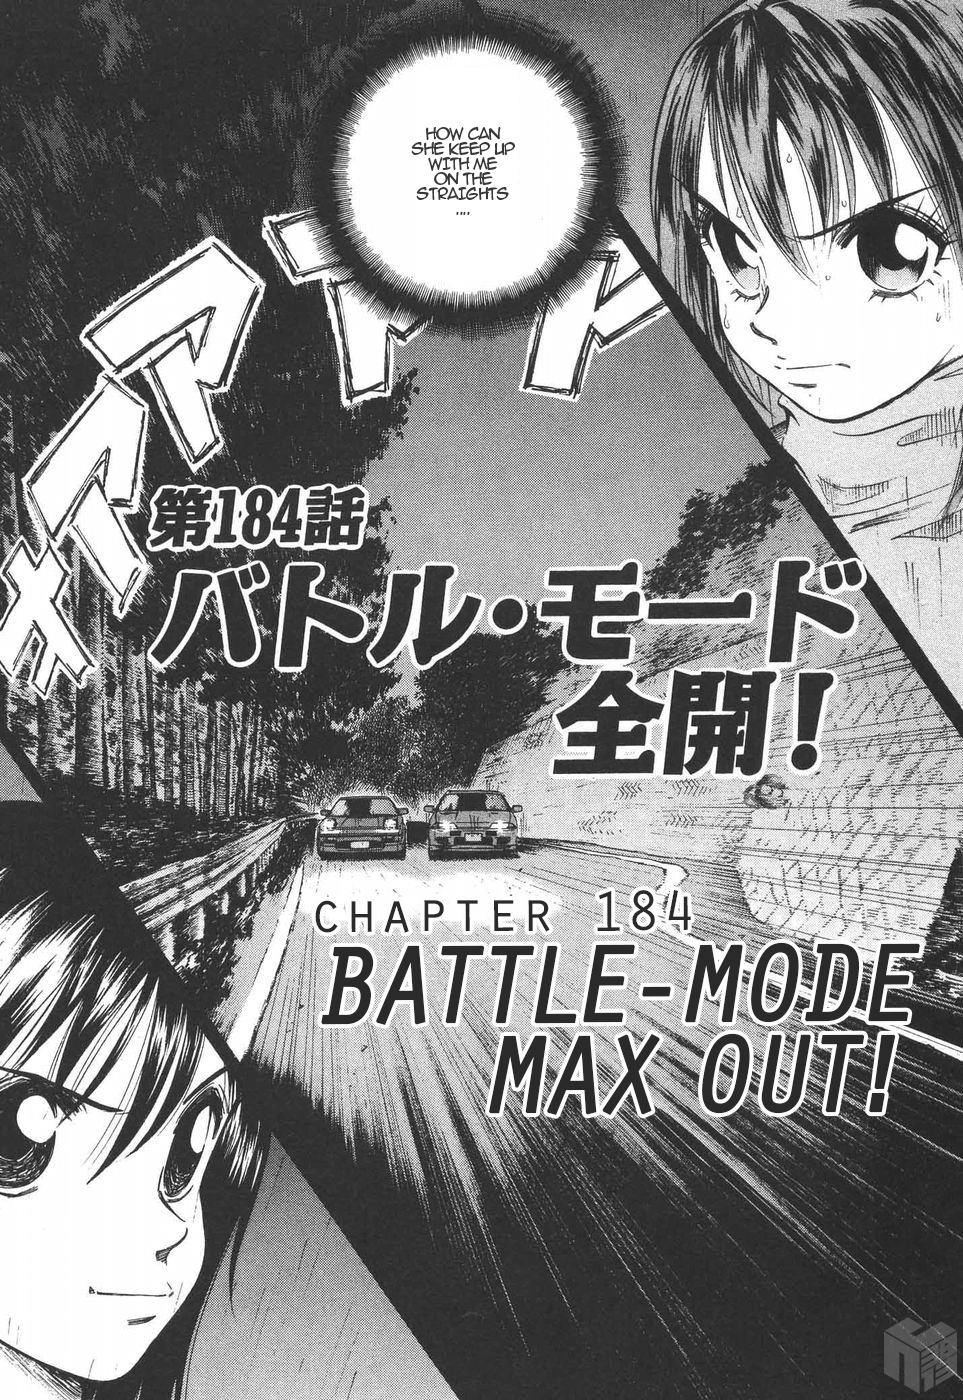 Over Rev! Vol. 17 Ch. 184 Battle Mode Max Out!